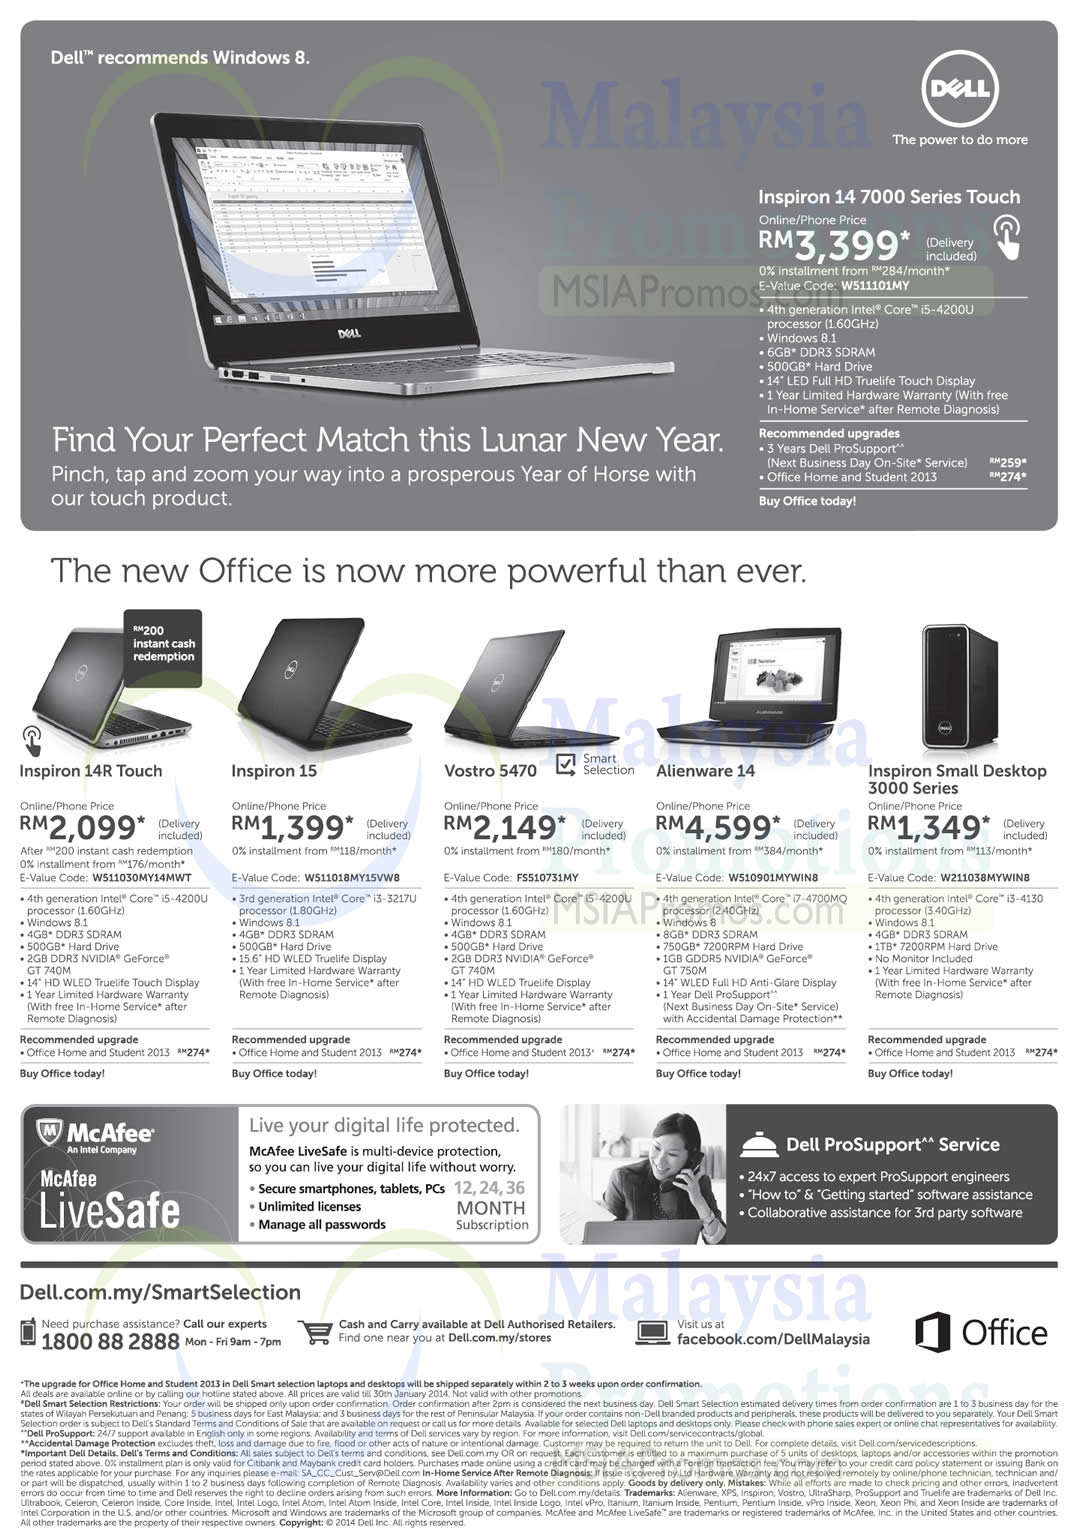 Featured image for Dell Notebooks & Desktop PC Offers 20 - 30 Jan 2014